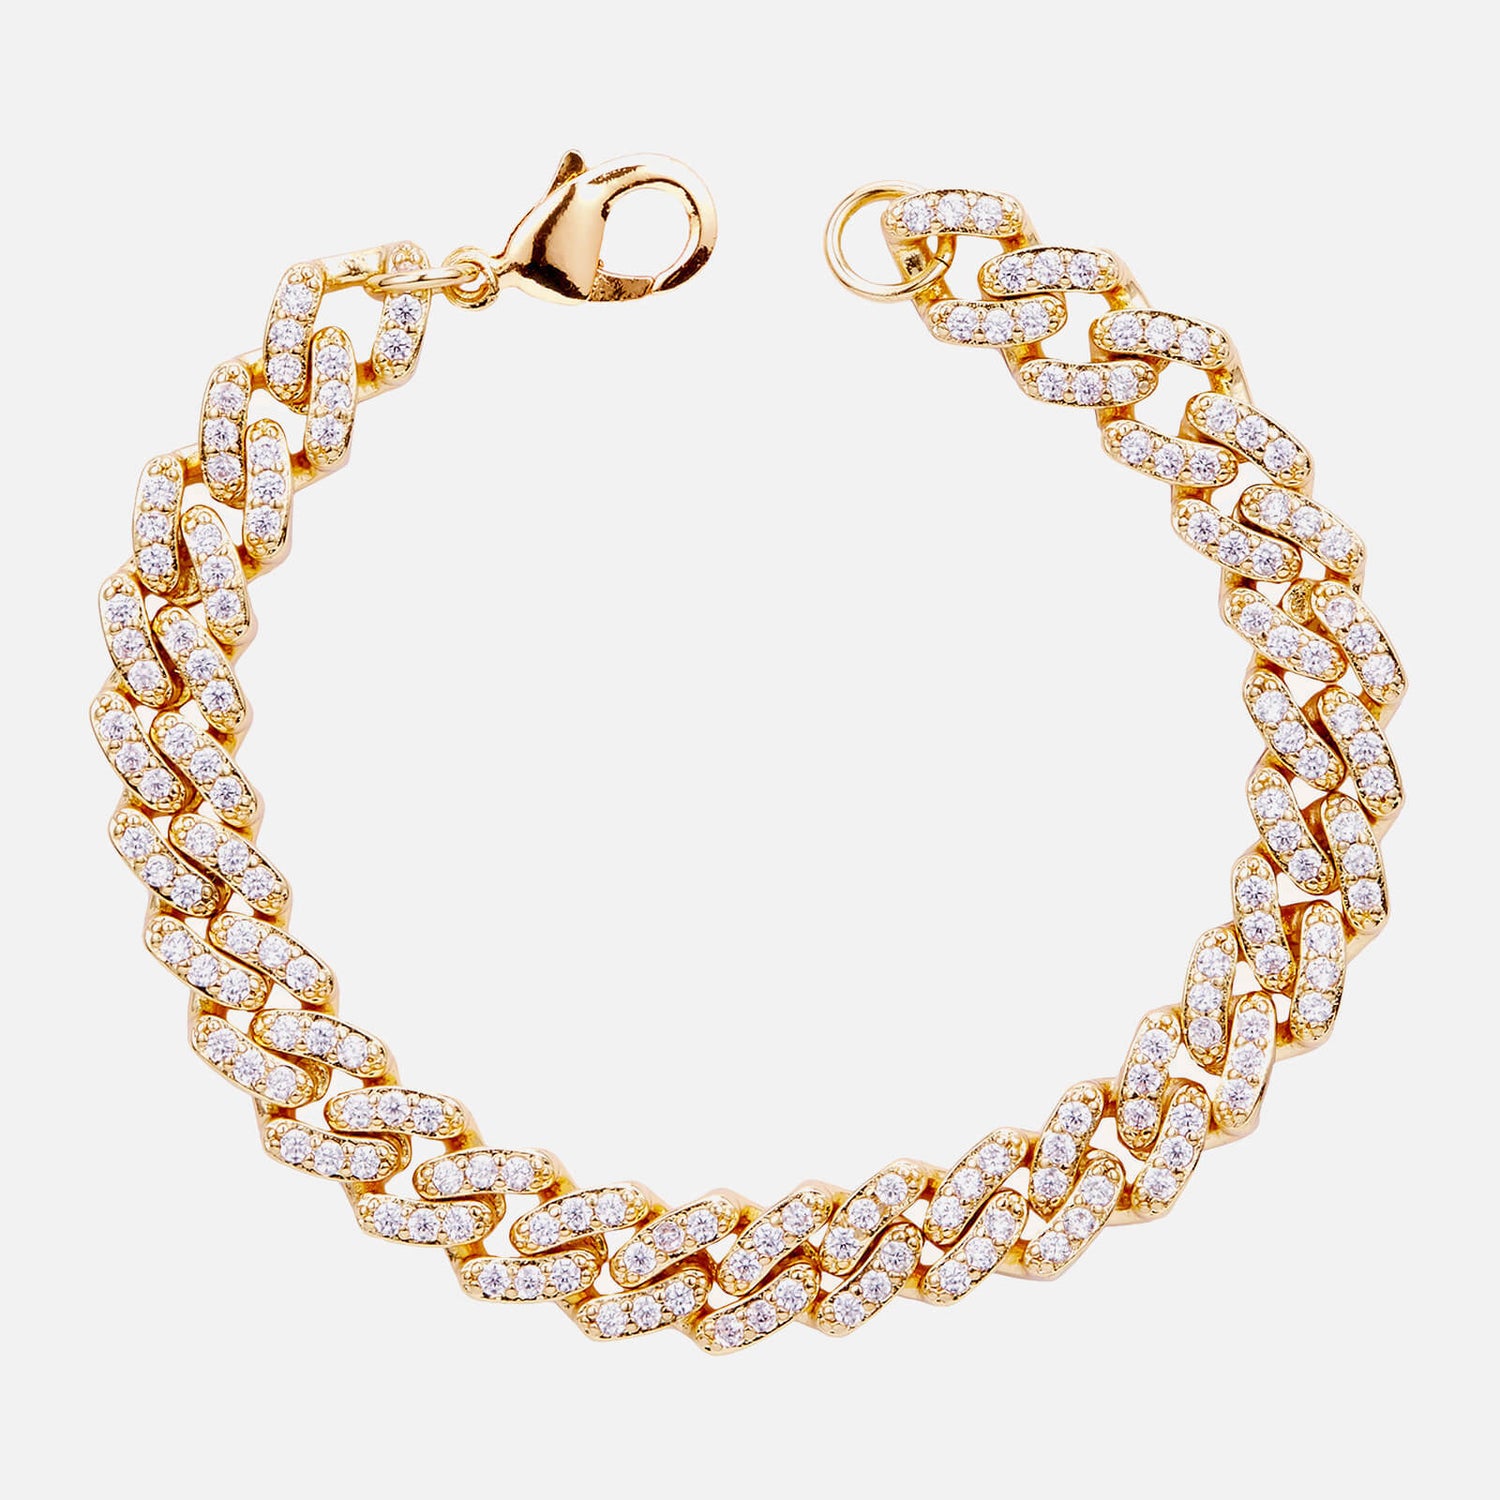 Crystal Haze Women's Mexican Chain Bracelet - Gold - Free UK Delivery ...